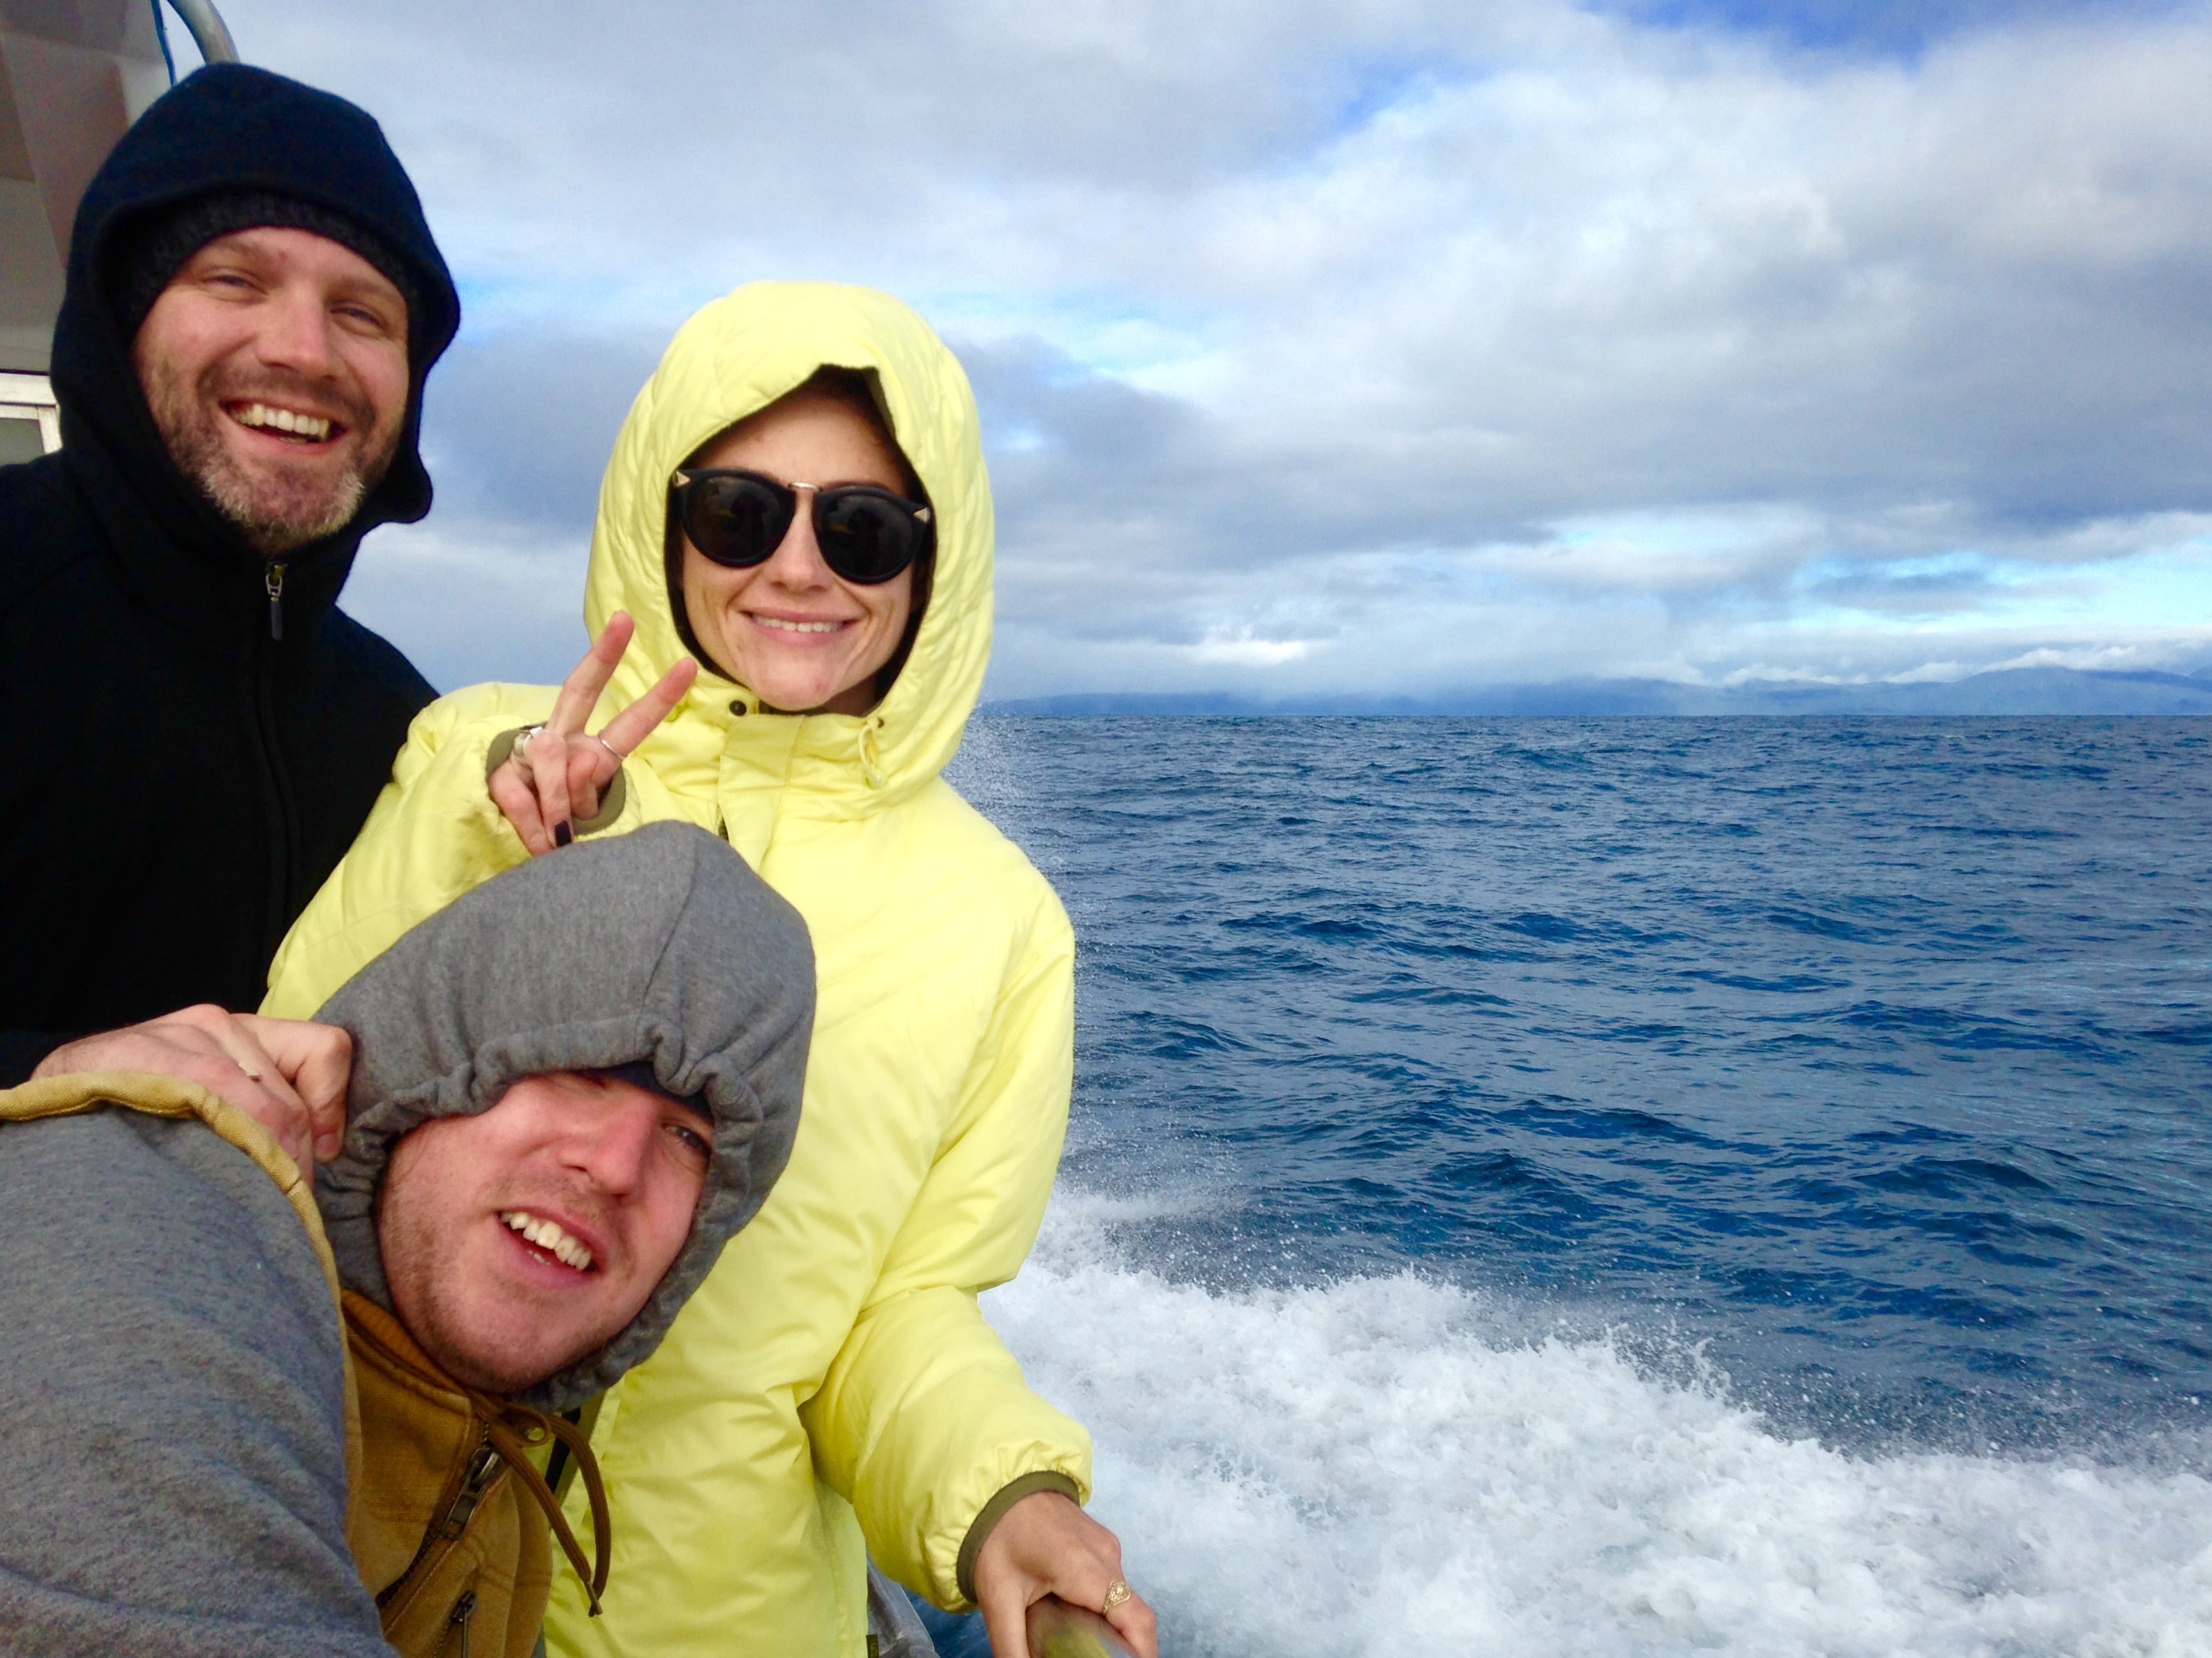 Three guests enjoy the wind on the Stewart Island, with their hoods up